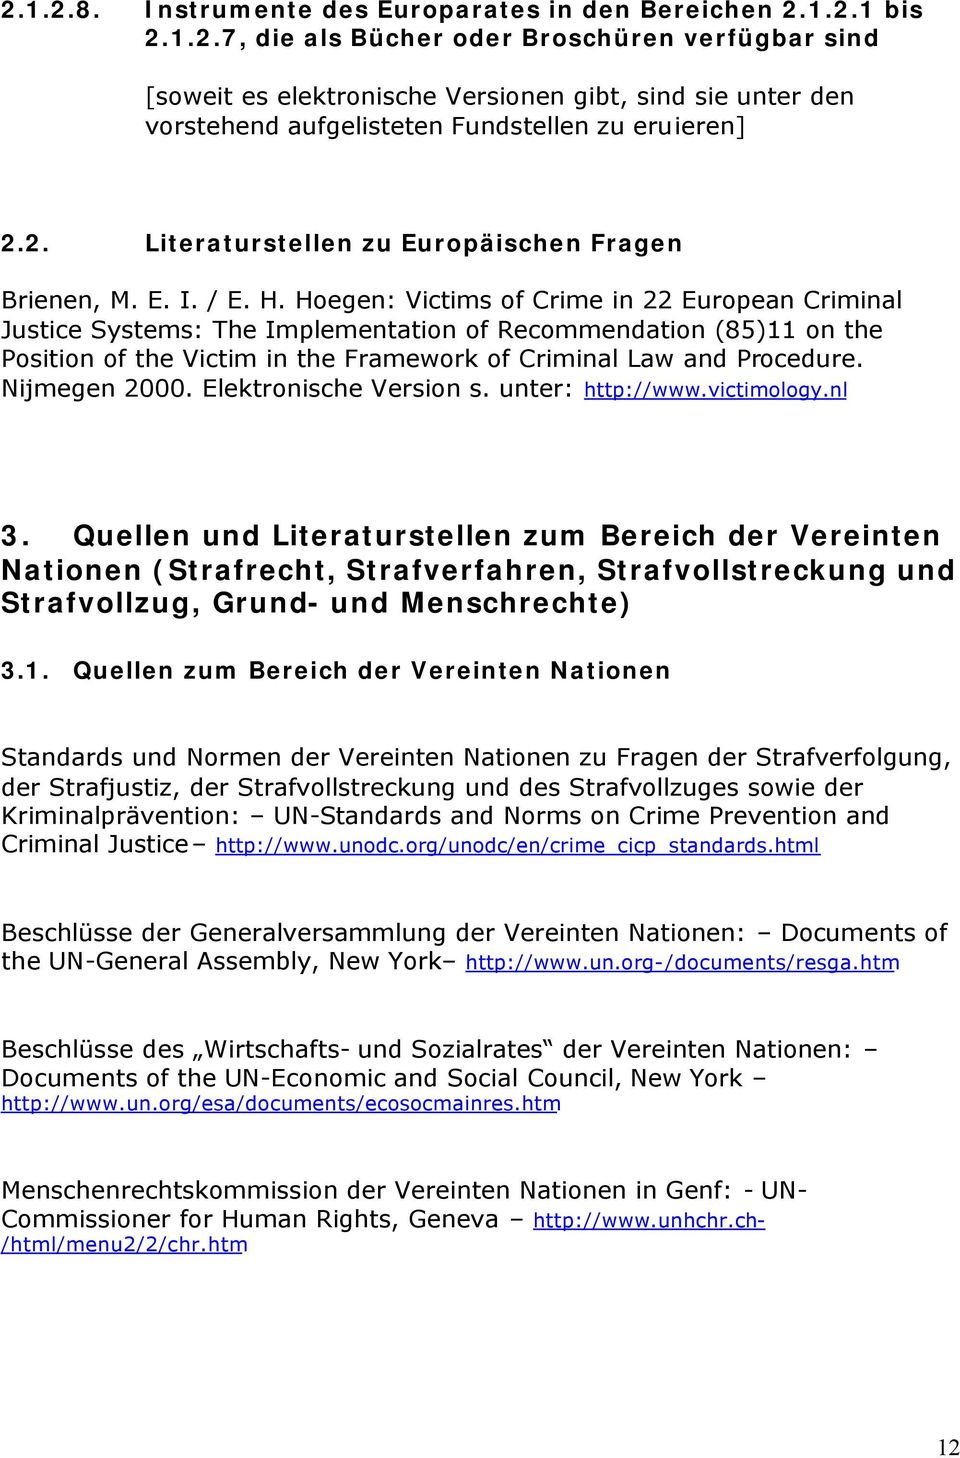 Hoegen: Victims of Crime in 22 European Criminal Justice Systems: The Implementation of Recommendation (85)11 on the Position of the Victim in the Framework of Criminal Law and Procedure.